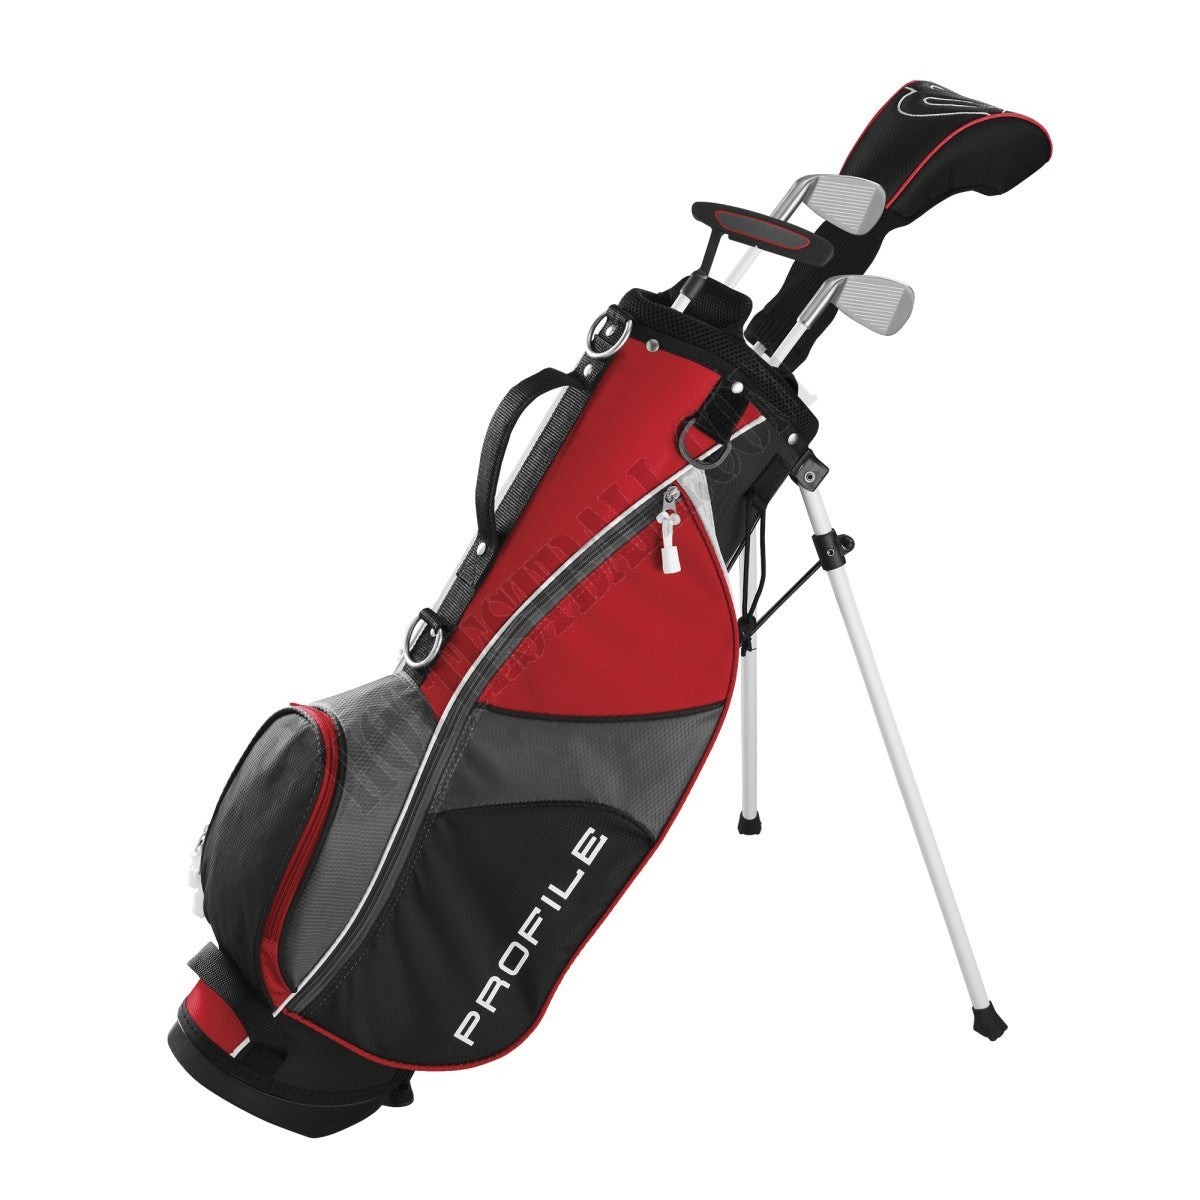 Kids Small Profile JGI Complete Golf Club Set - Carry, Red - Wilson Discount Store - Kids Small Profile JGI Complete Golf Club Set - Carry, Red - Wilson Discount Store